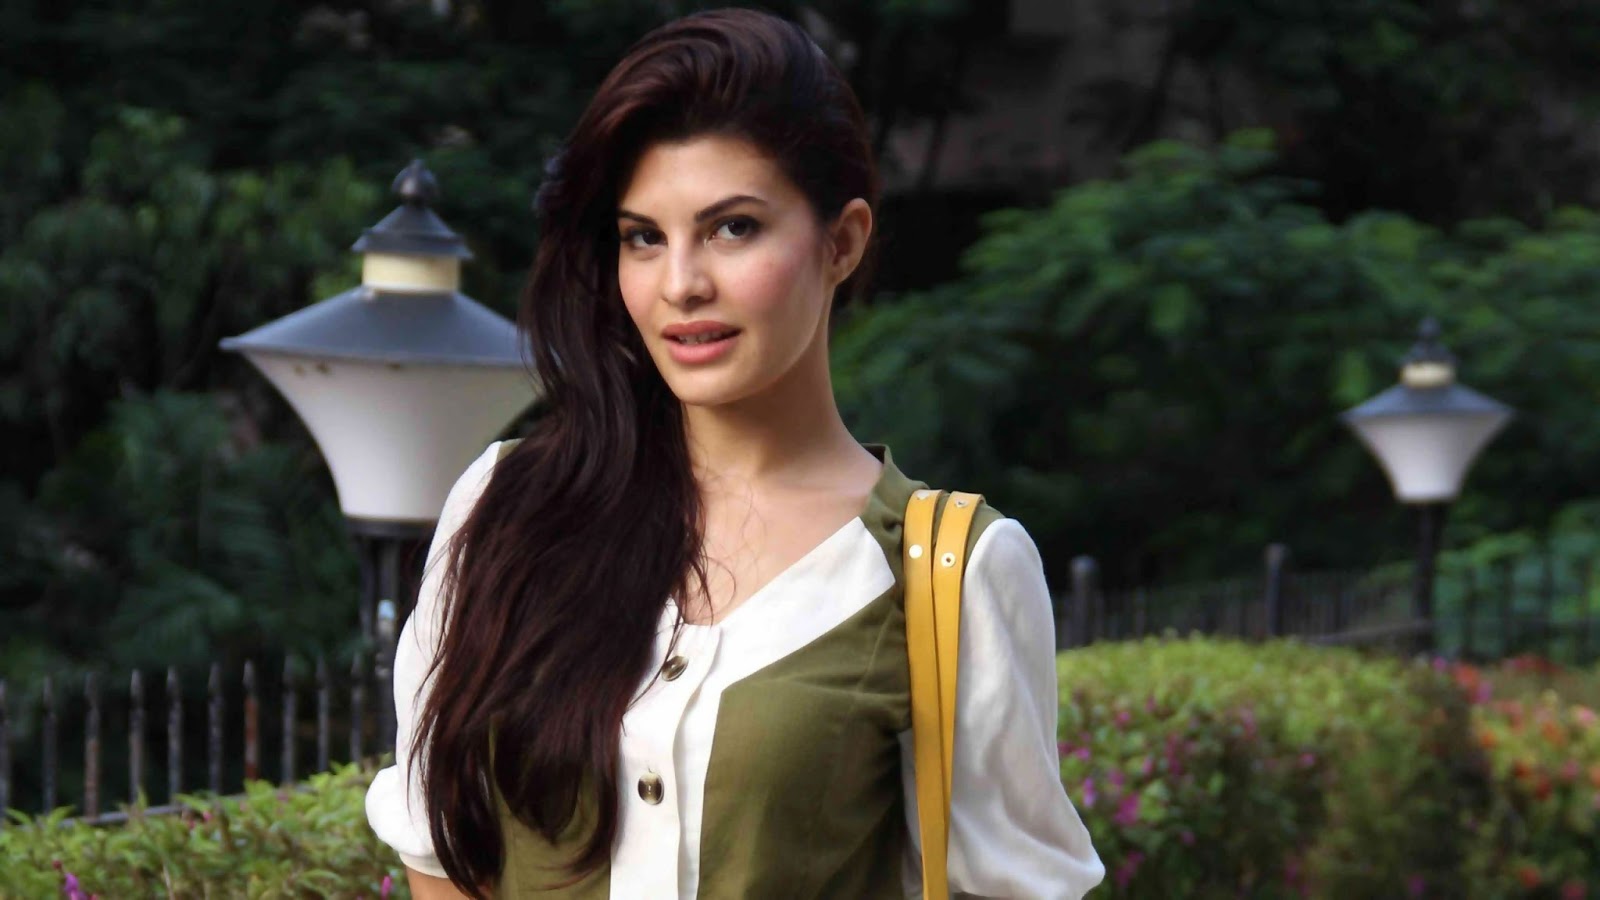 jacqueline wallpaper download,hair,beauty,hairstyle,snapshot,fashion